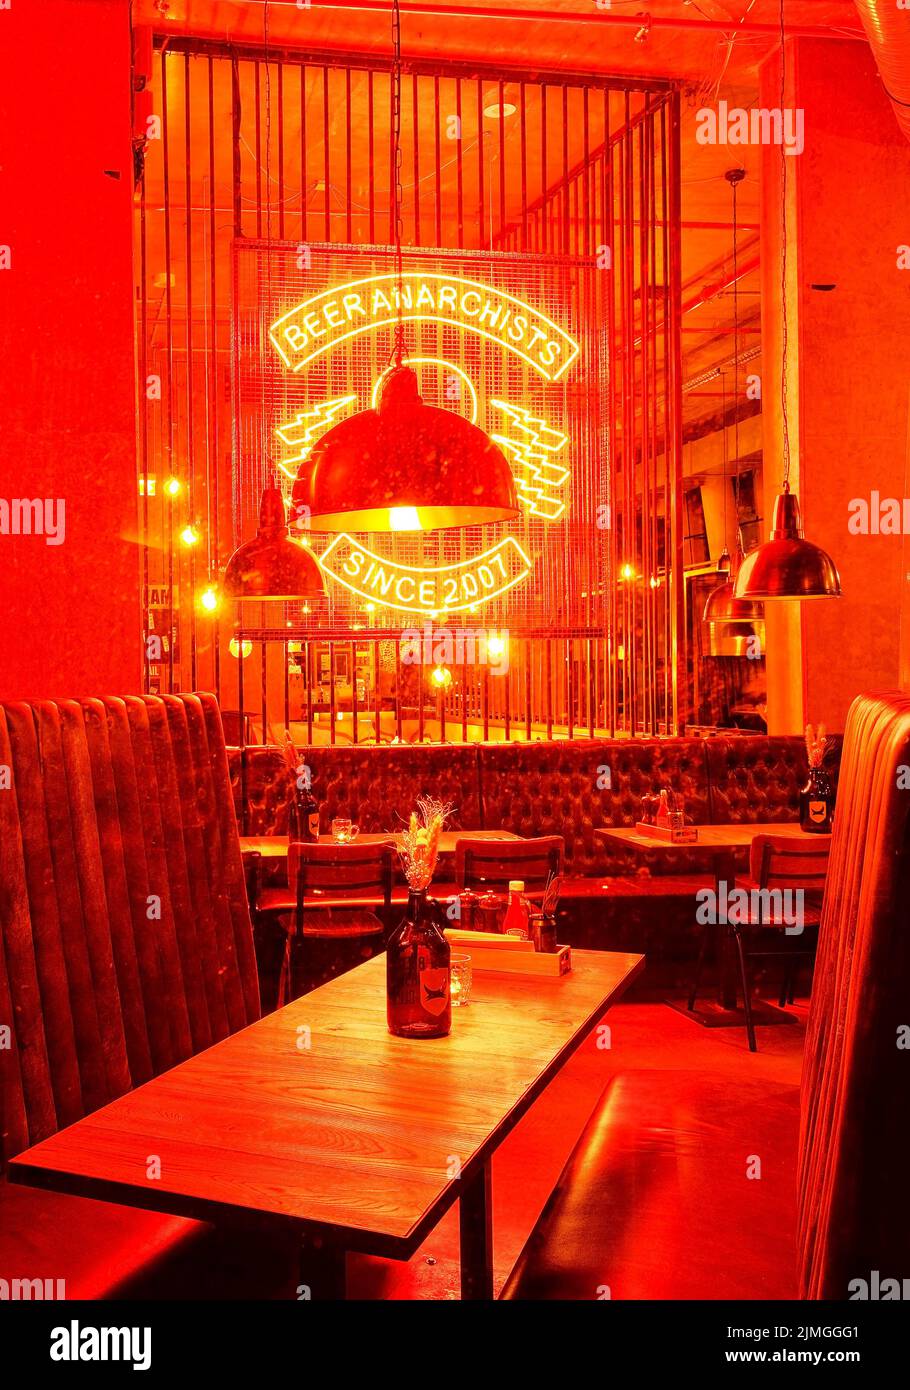 View of a stylish bar with special beers, Reeperbahn, St. Pauli, Hamburg, Germany, Europe Stock Photo